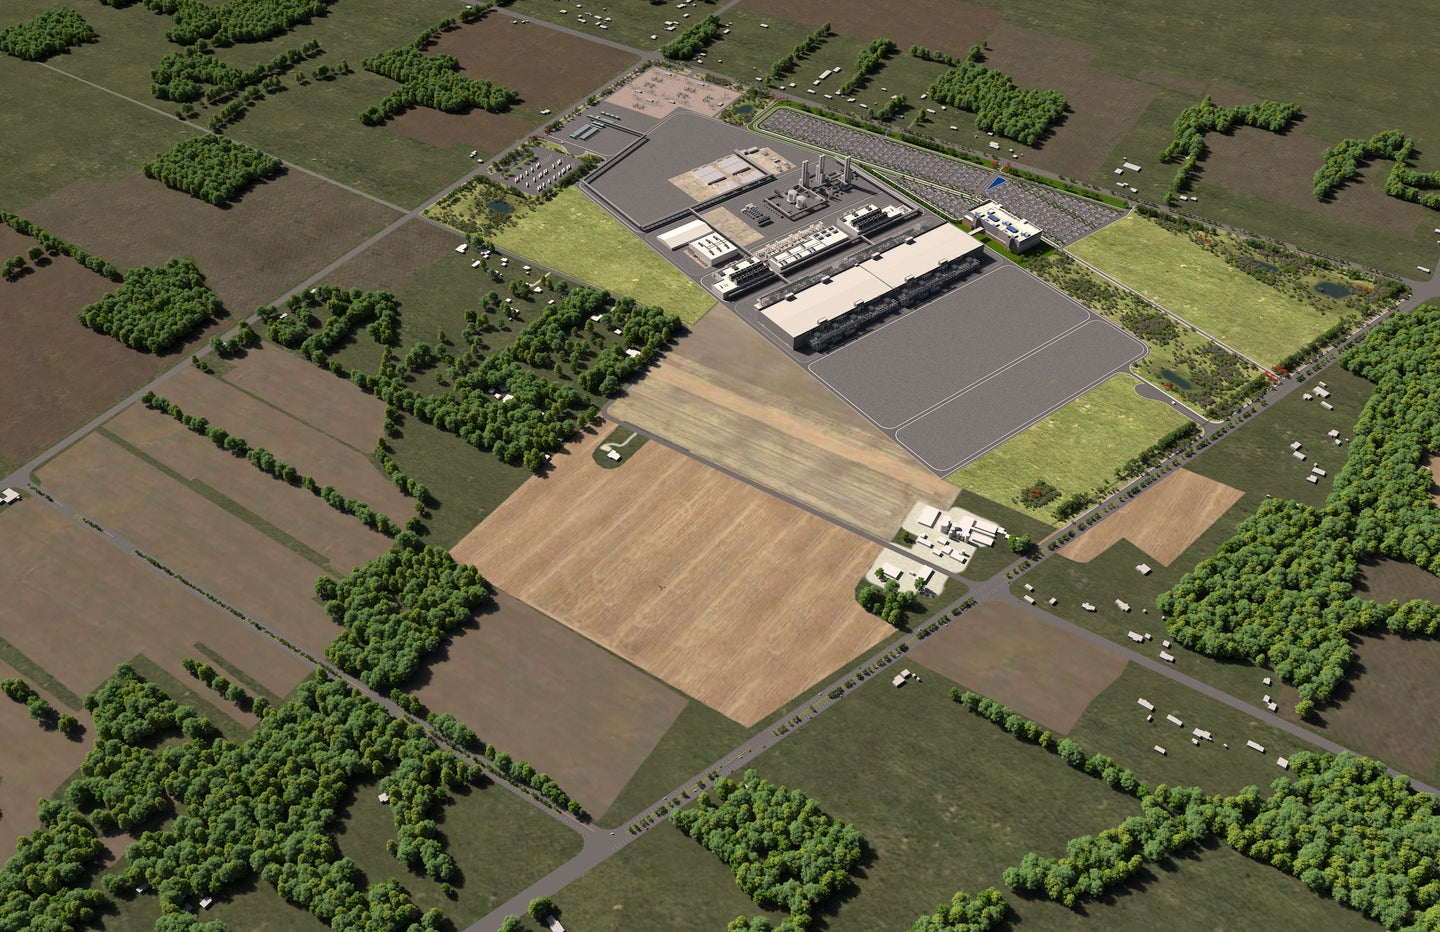 Intel released this rendering in January of new semiconductor facilities it plans to build in Ohio.